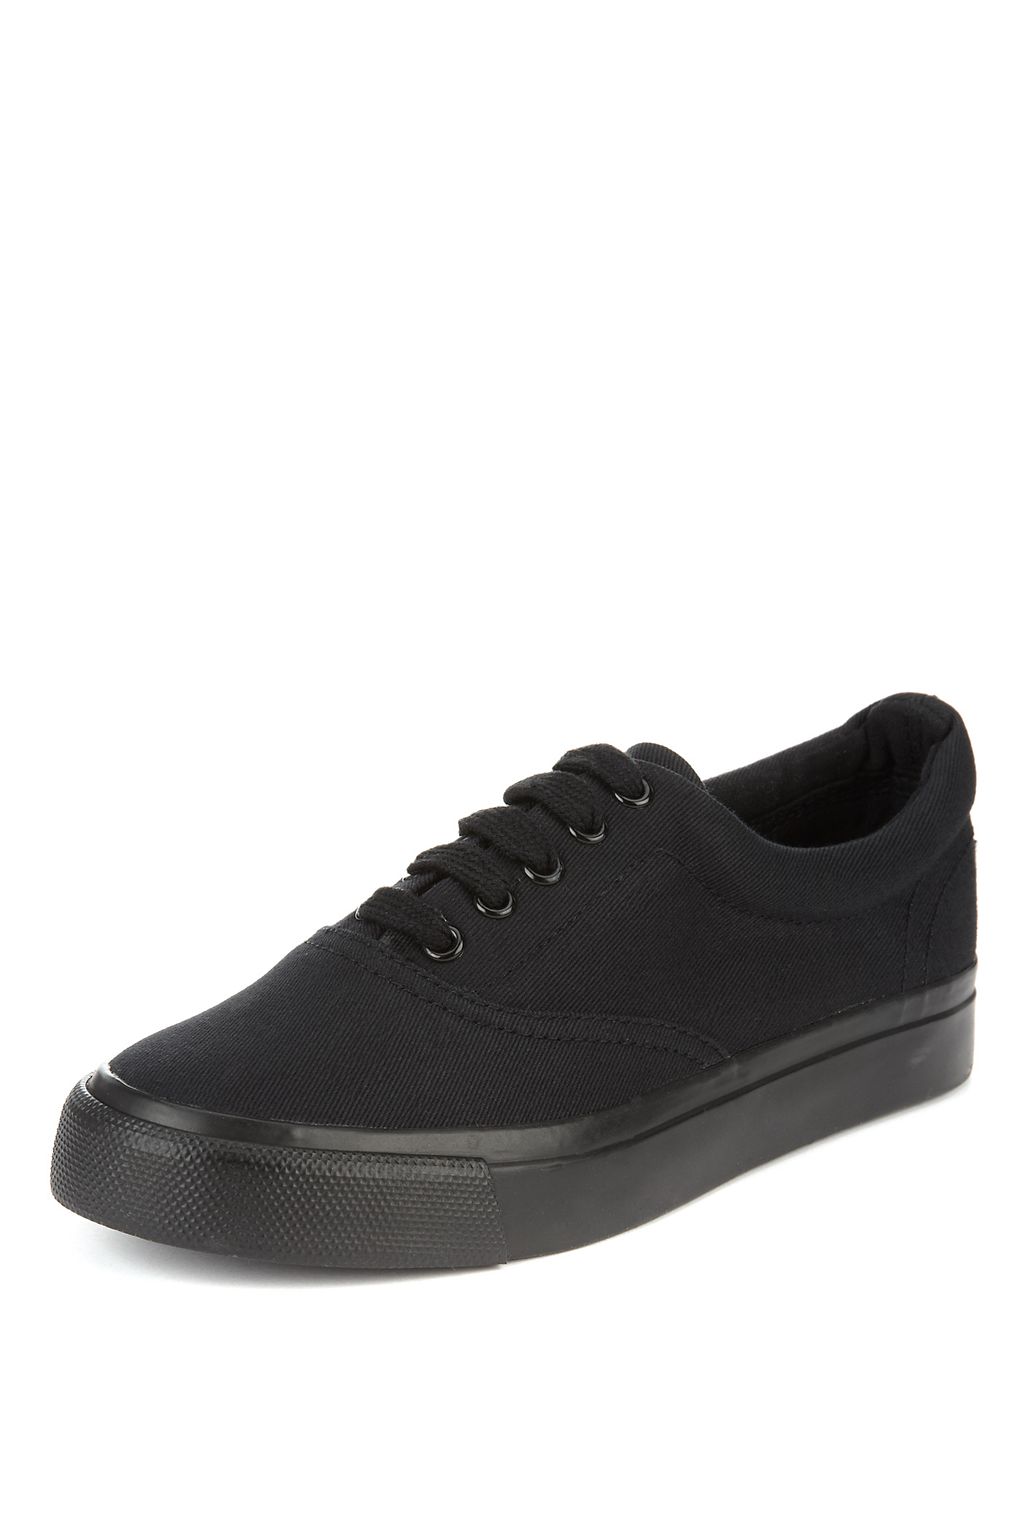 Contrast Sole Lace Up Trainers 3 of 3